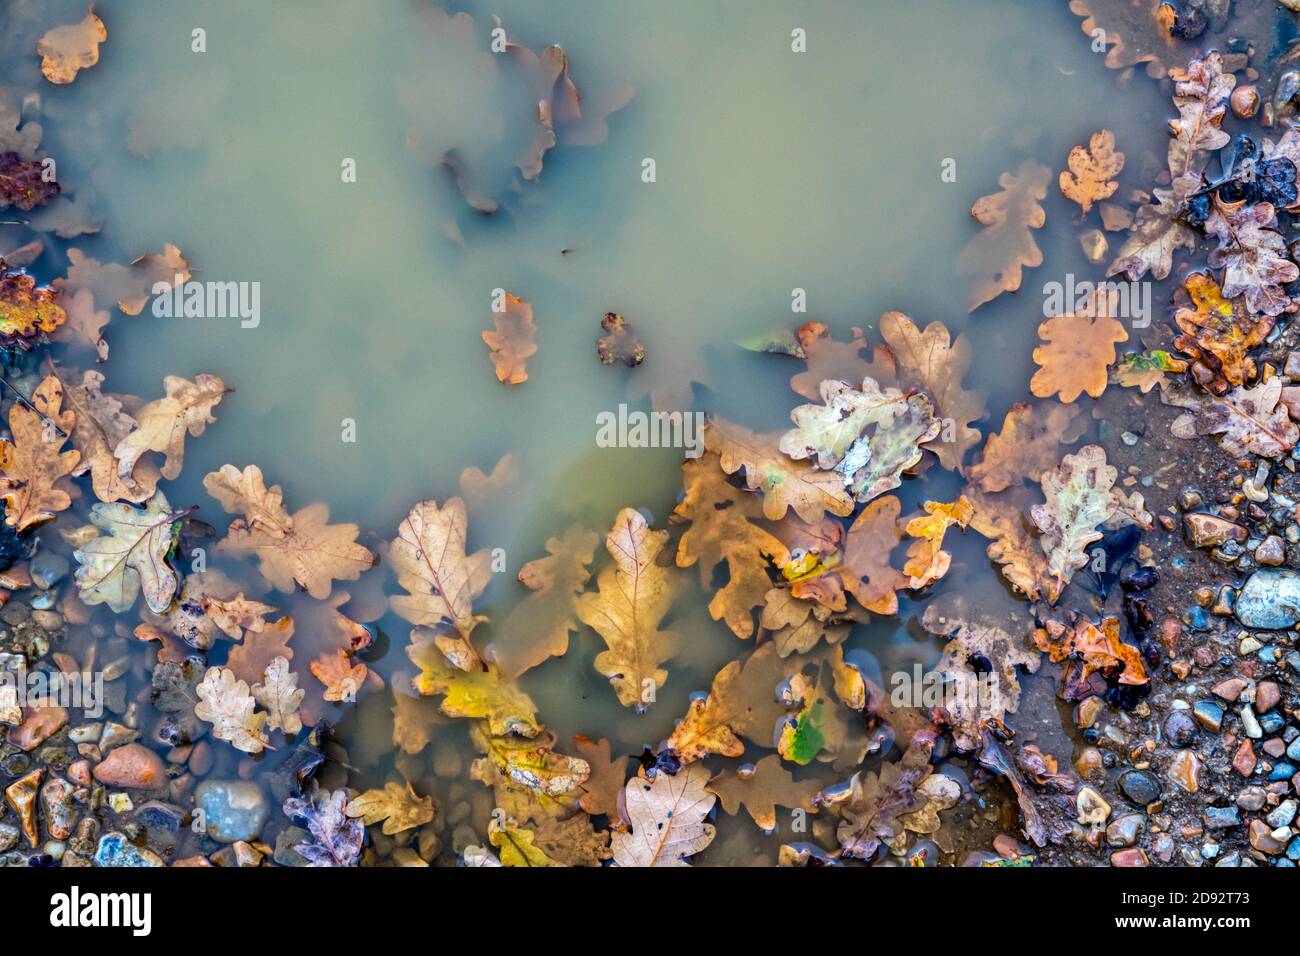 Autumn leaves around the edge of a puddle of rainwater. Stock Photo